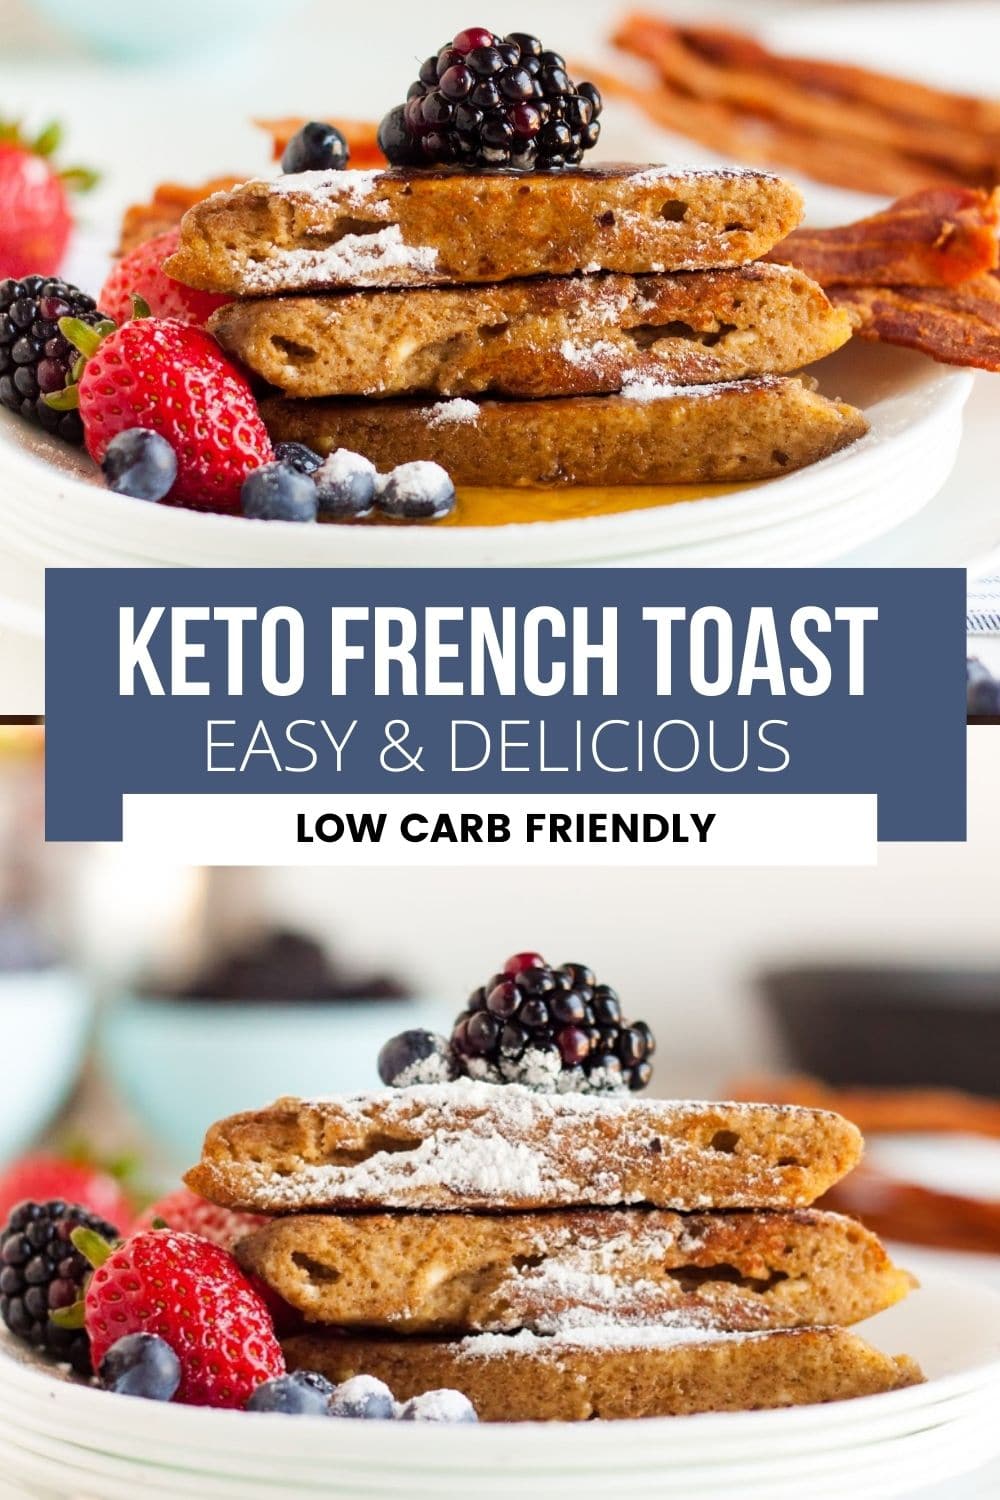 keto French toast plated with berries